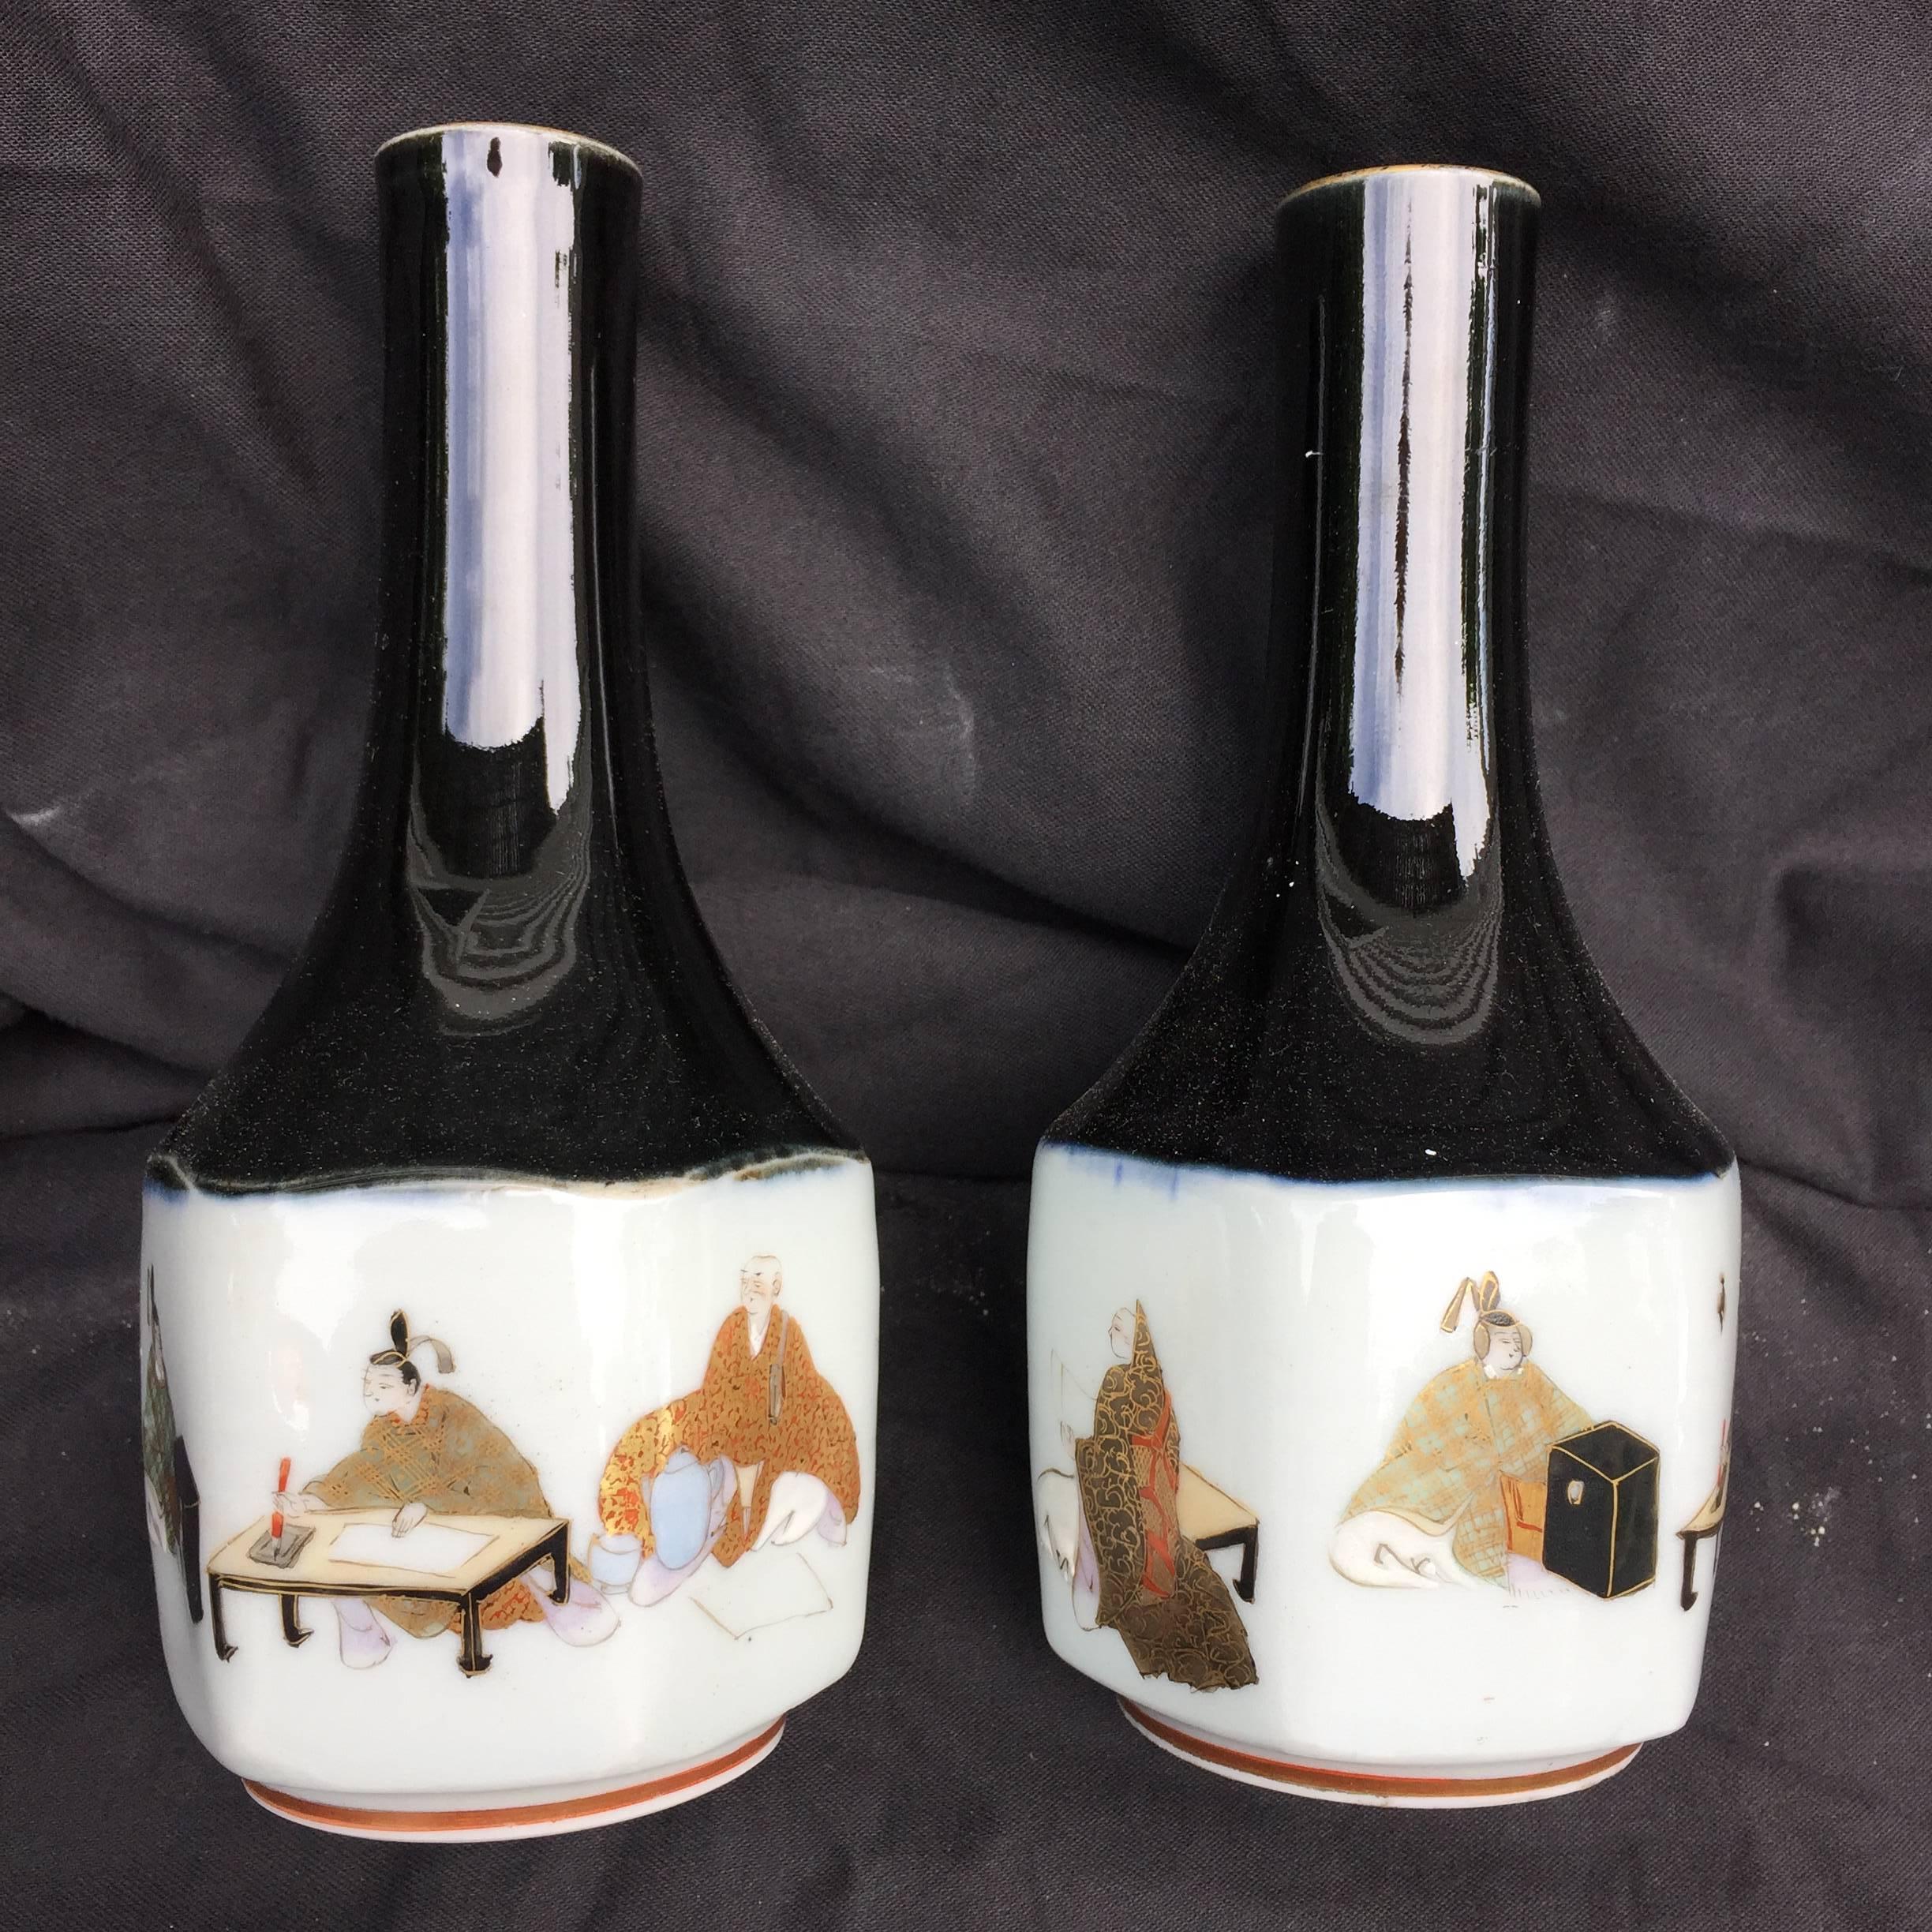 Here's a wonderful pair of Japanese hand-painted porcelain sake bottles dating to the 19th century. Notice the superb detail and gilding paintings of each cameo by the artist! Kutani kiln. Unimprovable.

Dimensions: 6